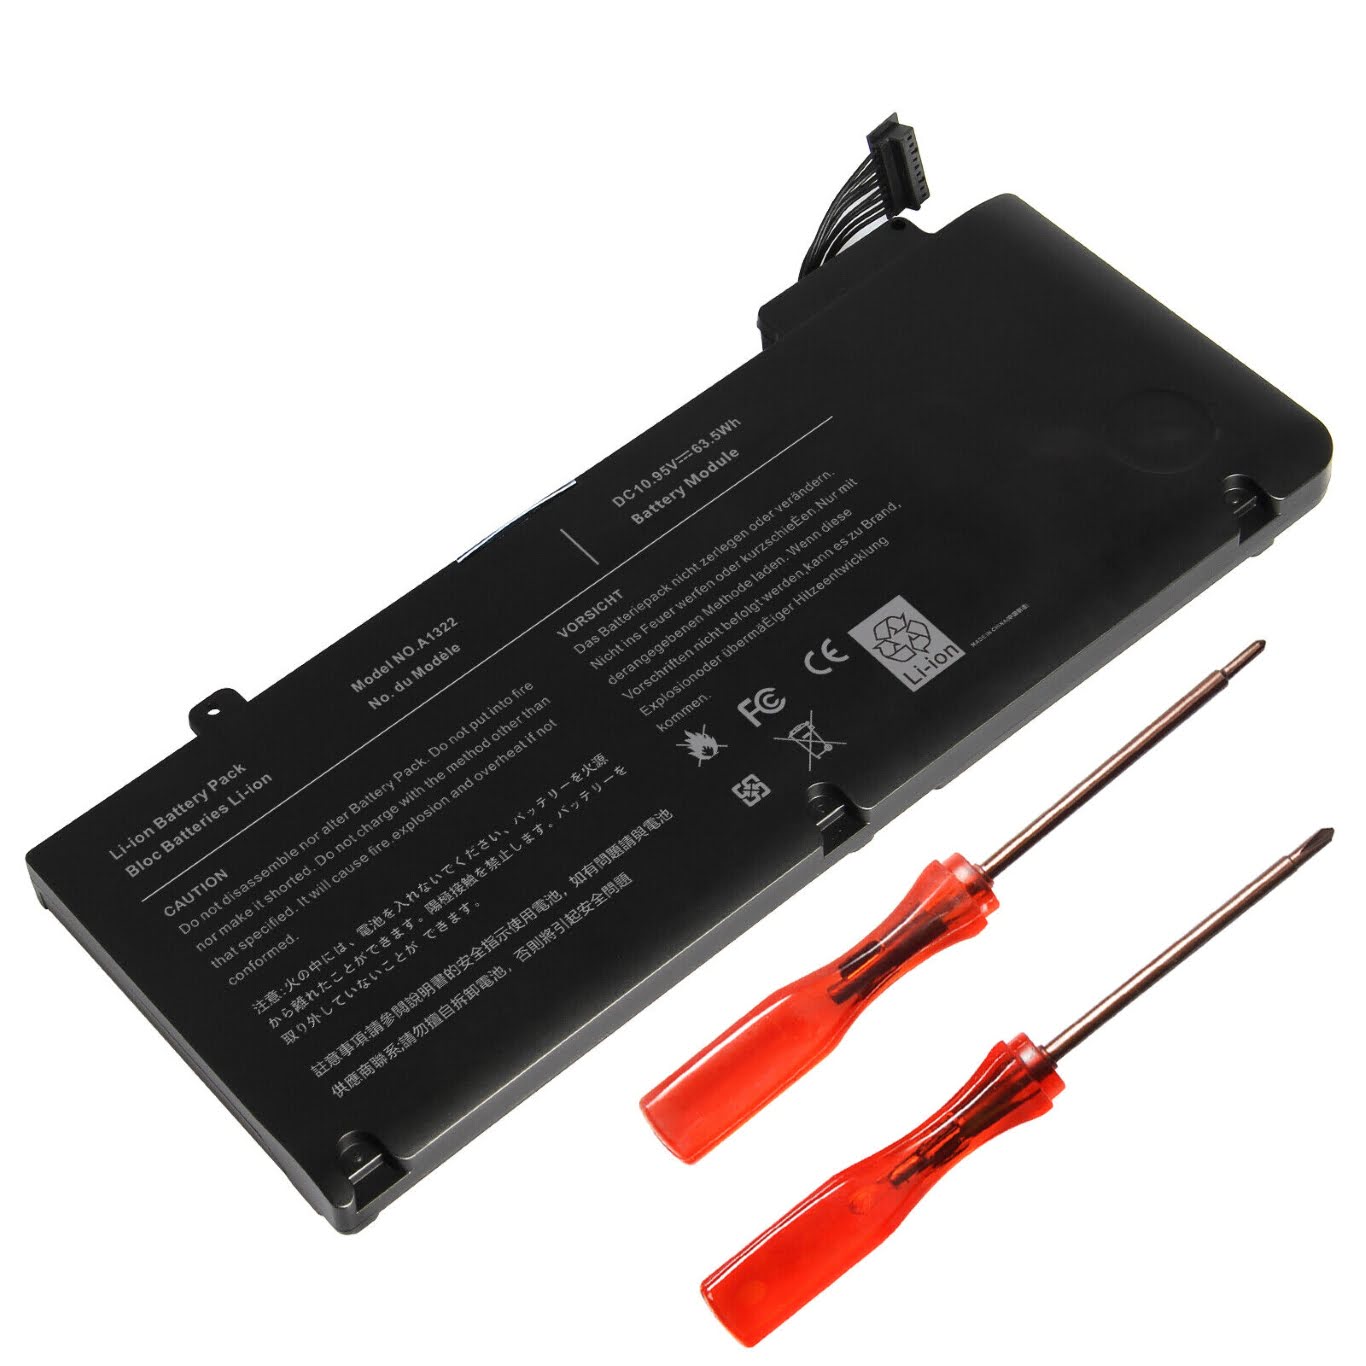 Apple 020-6547-a, 020-6765-a Laptop Batteries For All Early 2011 13